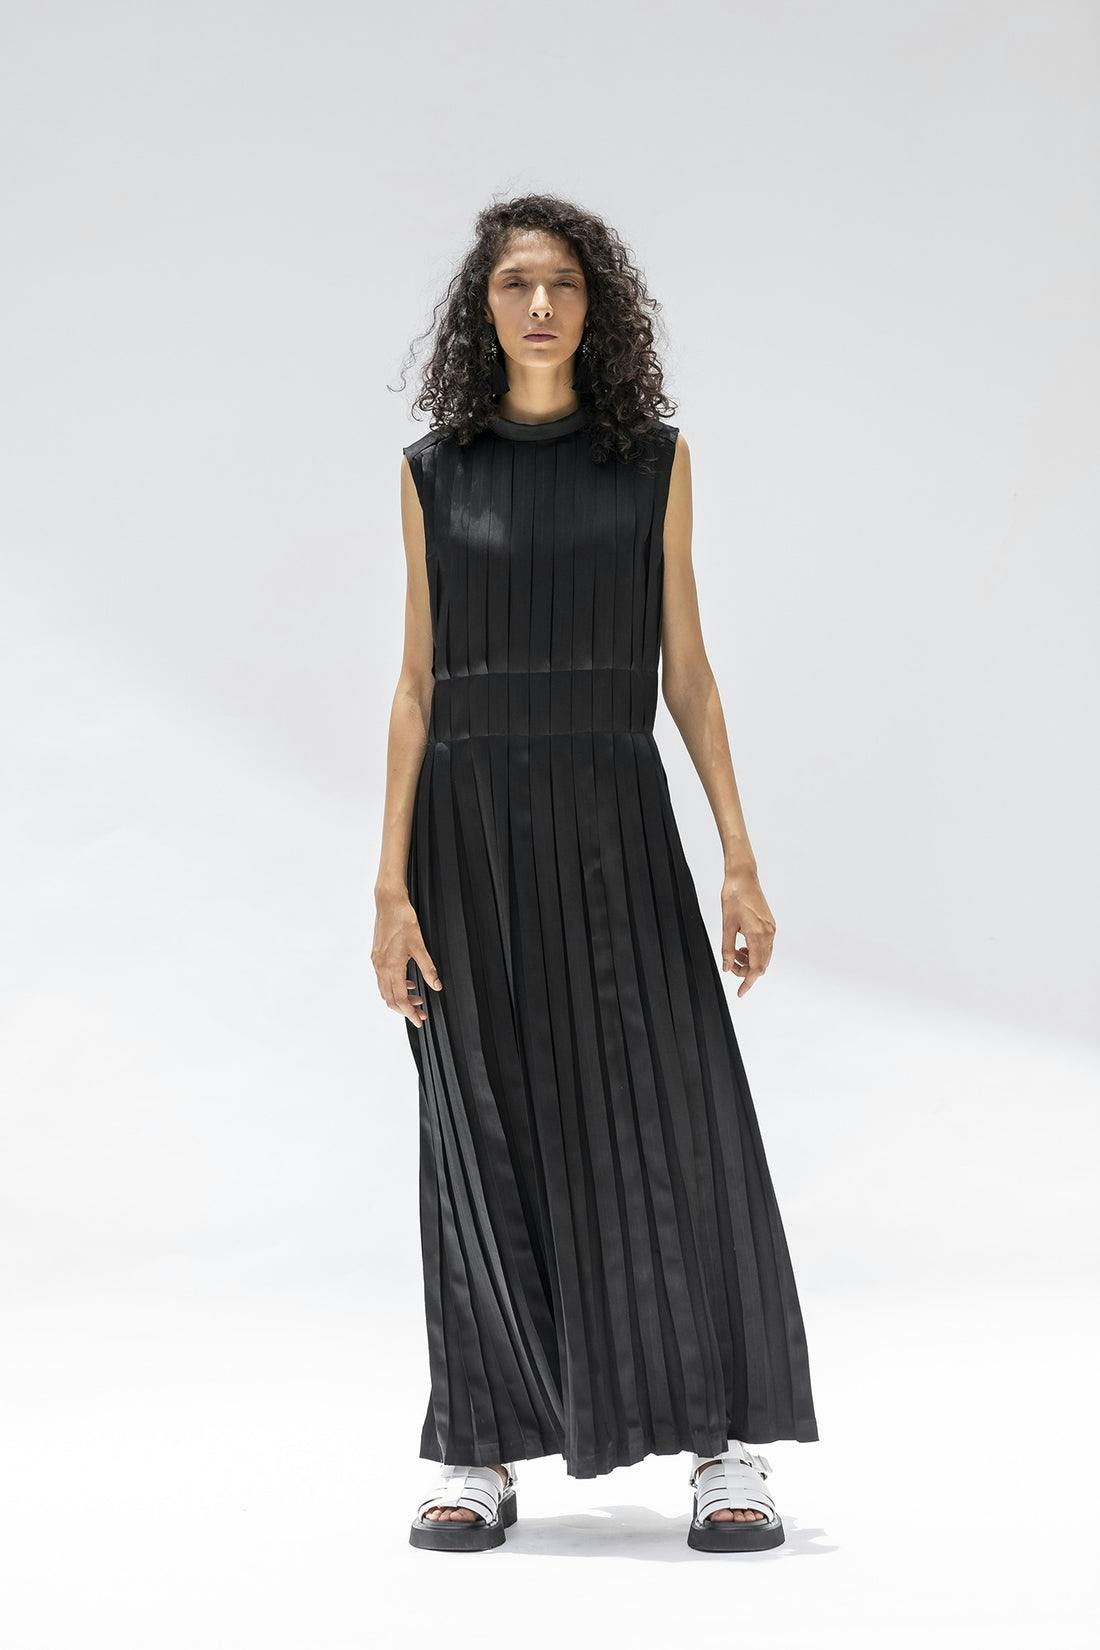 Overall Box Pleated Silk Dress, a product by Corpora Studio